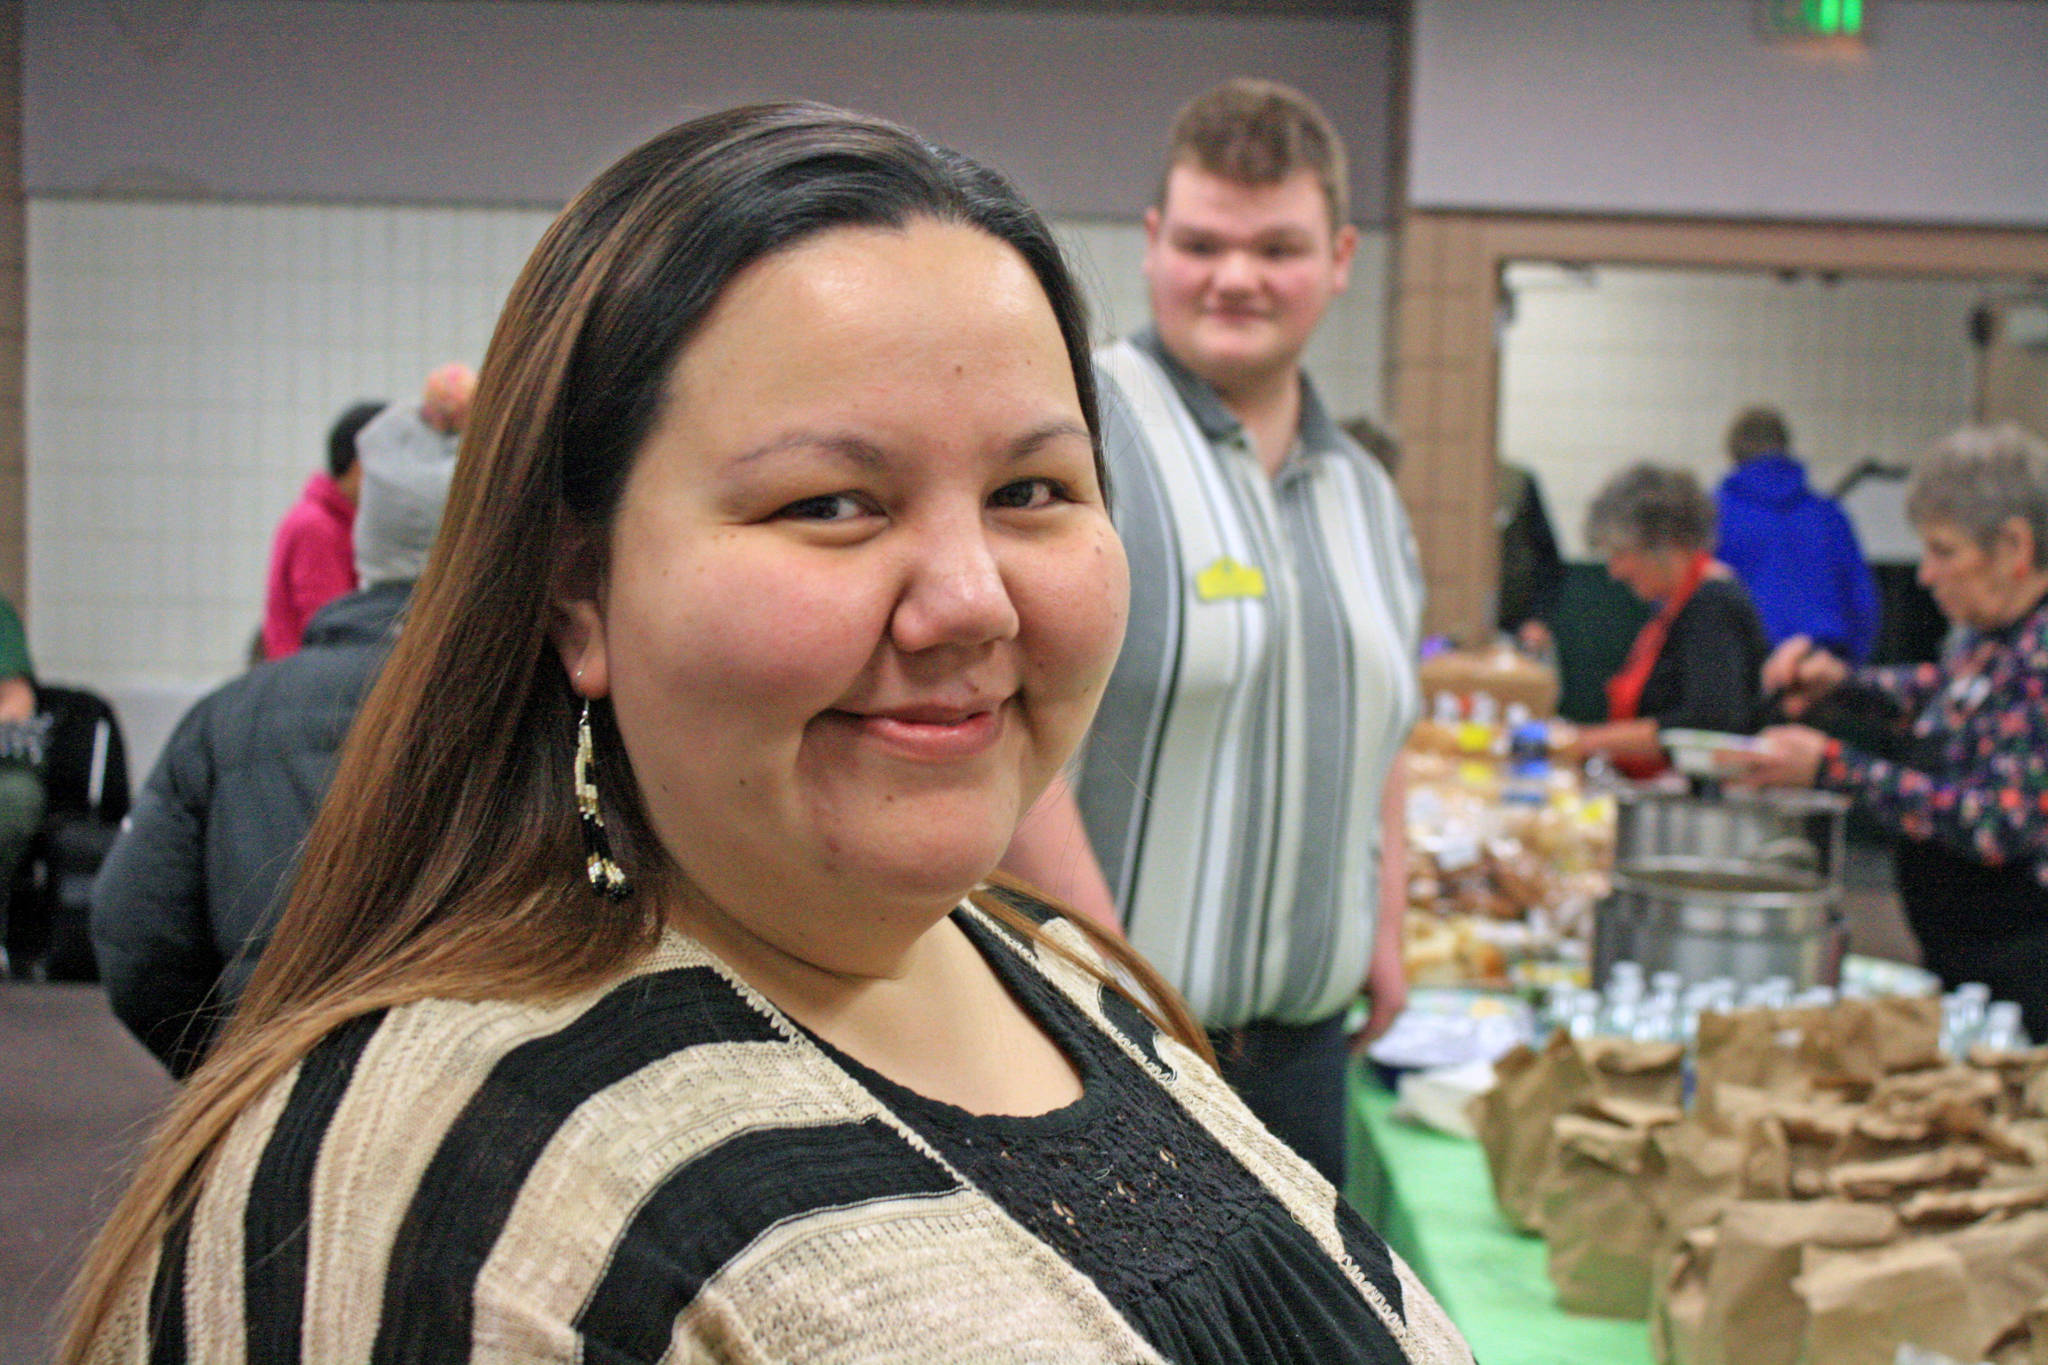 Kenai resident Amanda Pallones attends Project Homeless Connect. Pallones came out to the Jan. 24 event to access services she otherwise would have to spent time and gas seeking at different locations around town. (Photo by Erin Thompson/Peninsula Clarion)